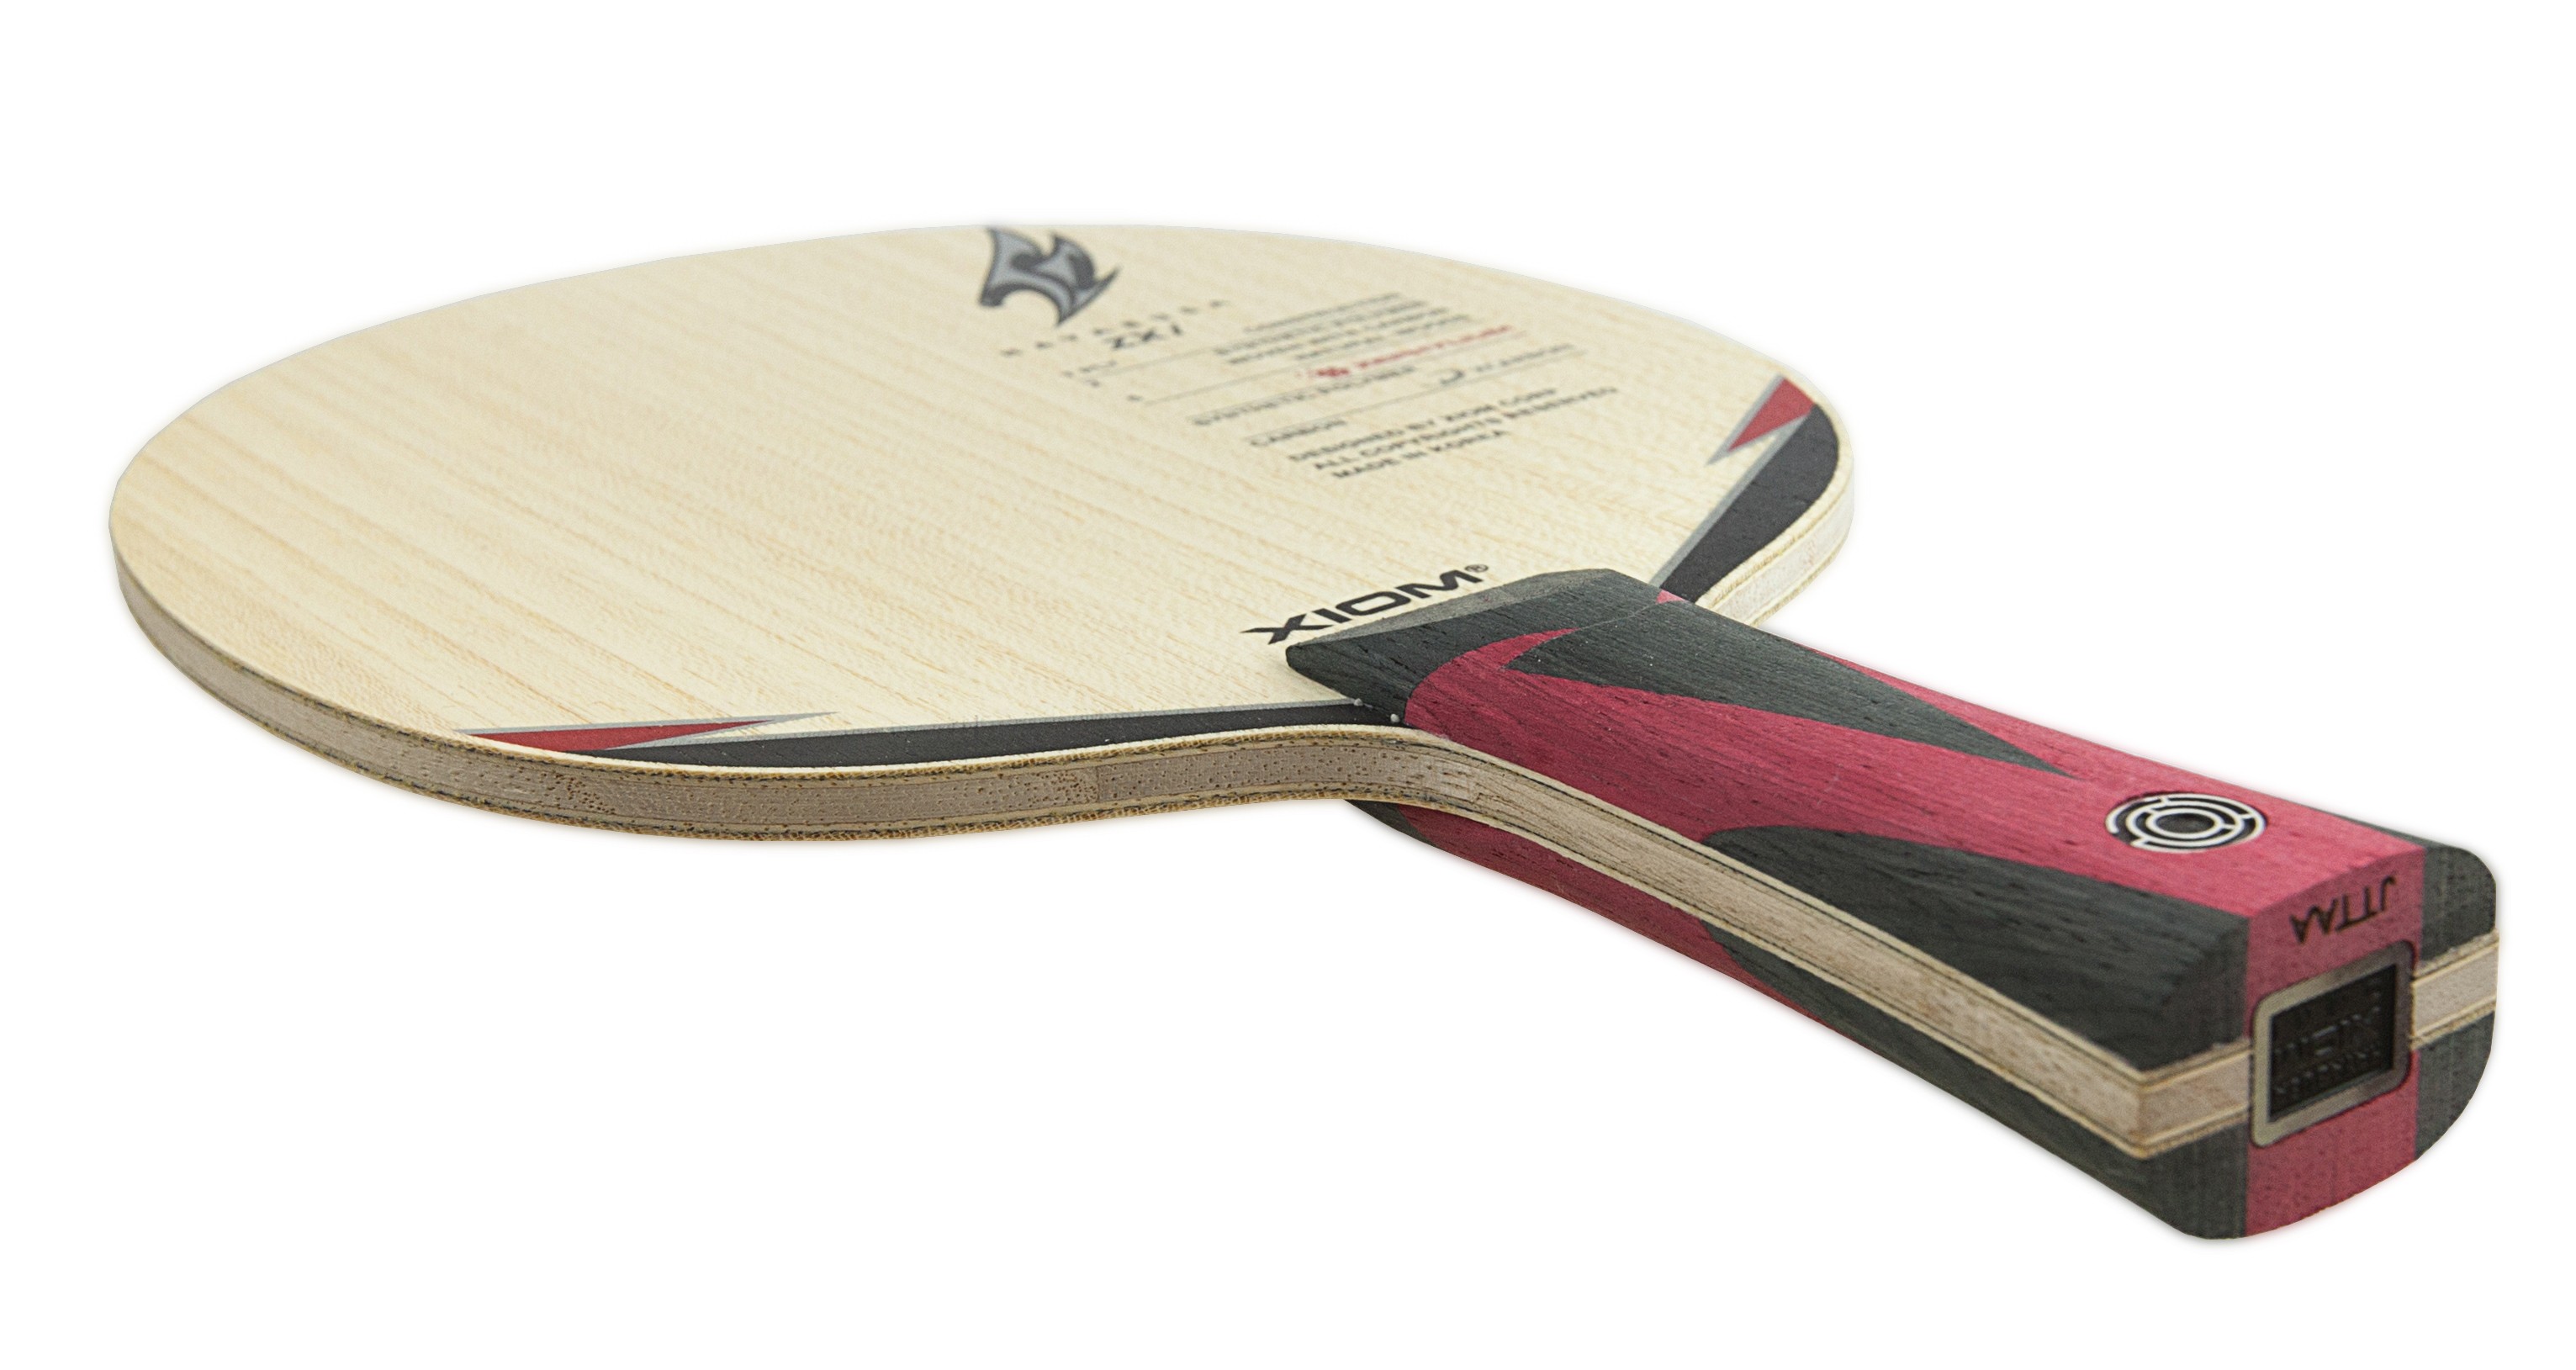 CHINESE PENHOLD XIOM HAYABUZA ZX TABLE TENNIS BLADE + EXPEDITED SHIPPING 